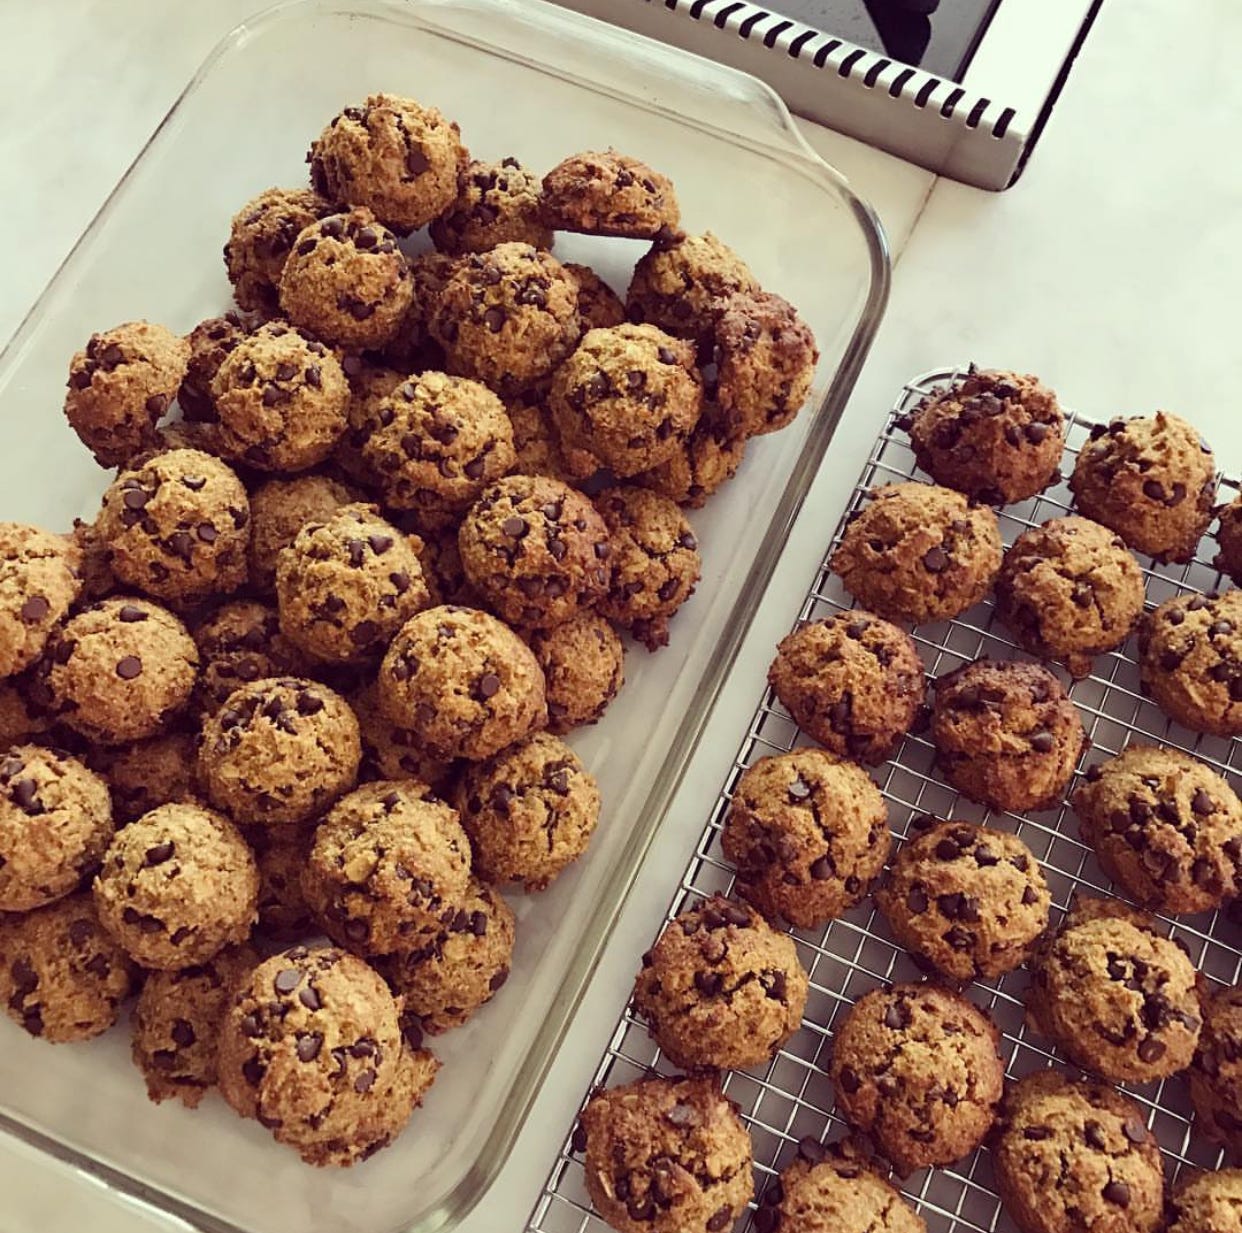 brown cookies with darker brown chocolate chips resting in a clear glass baking dish and on a metal drying rack on top of a white countertop